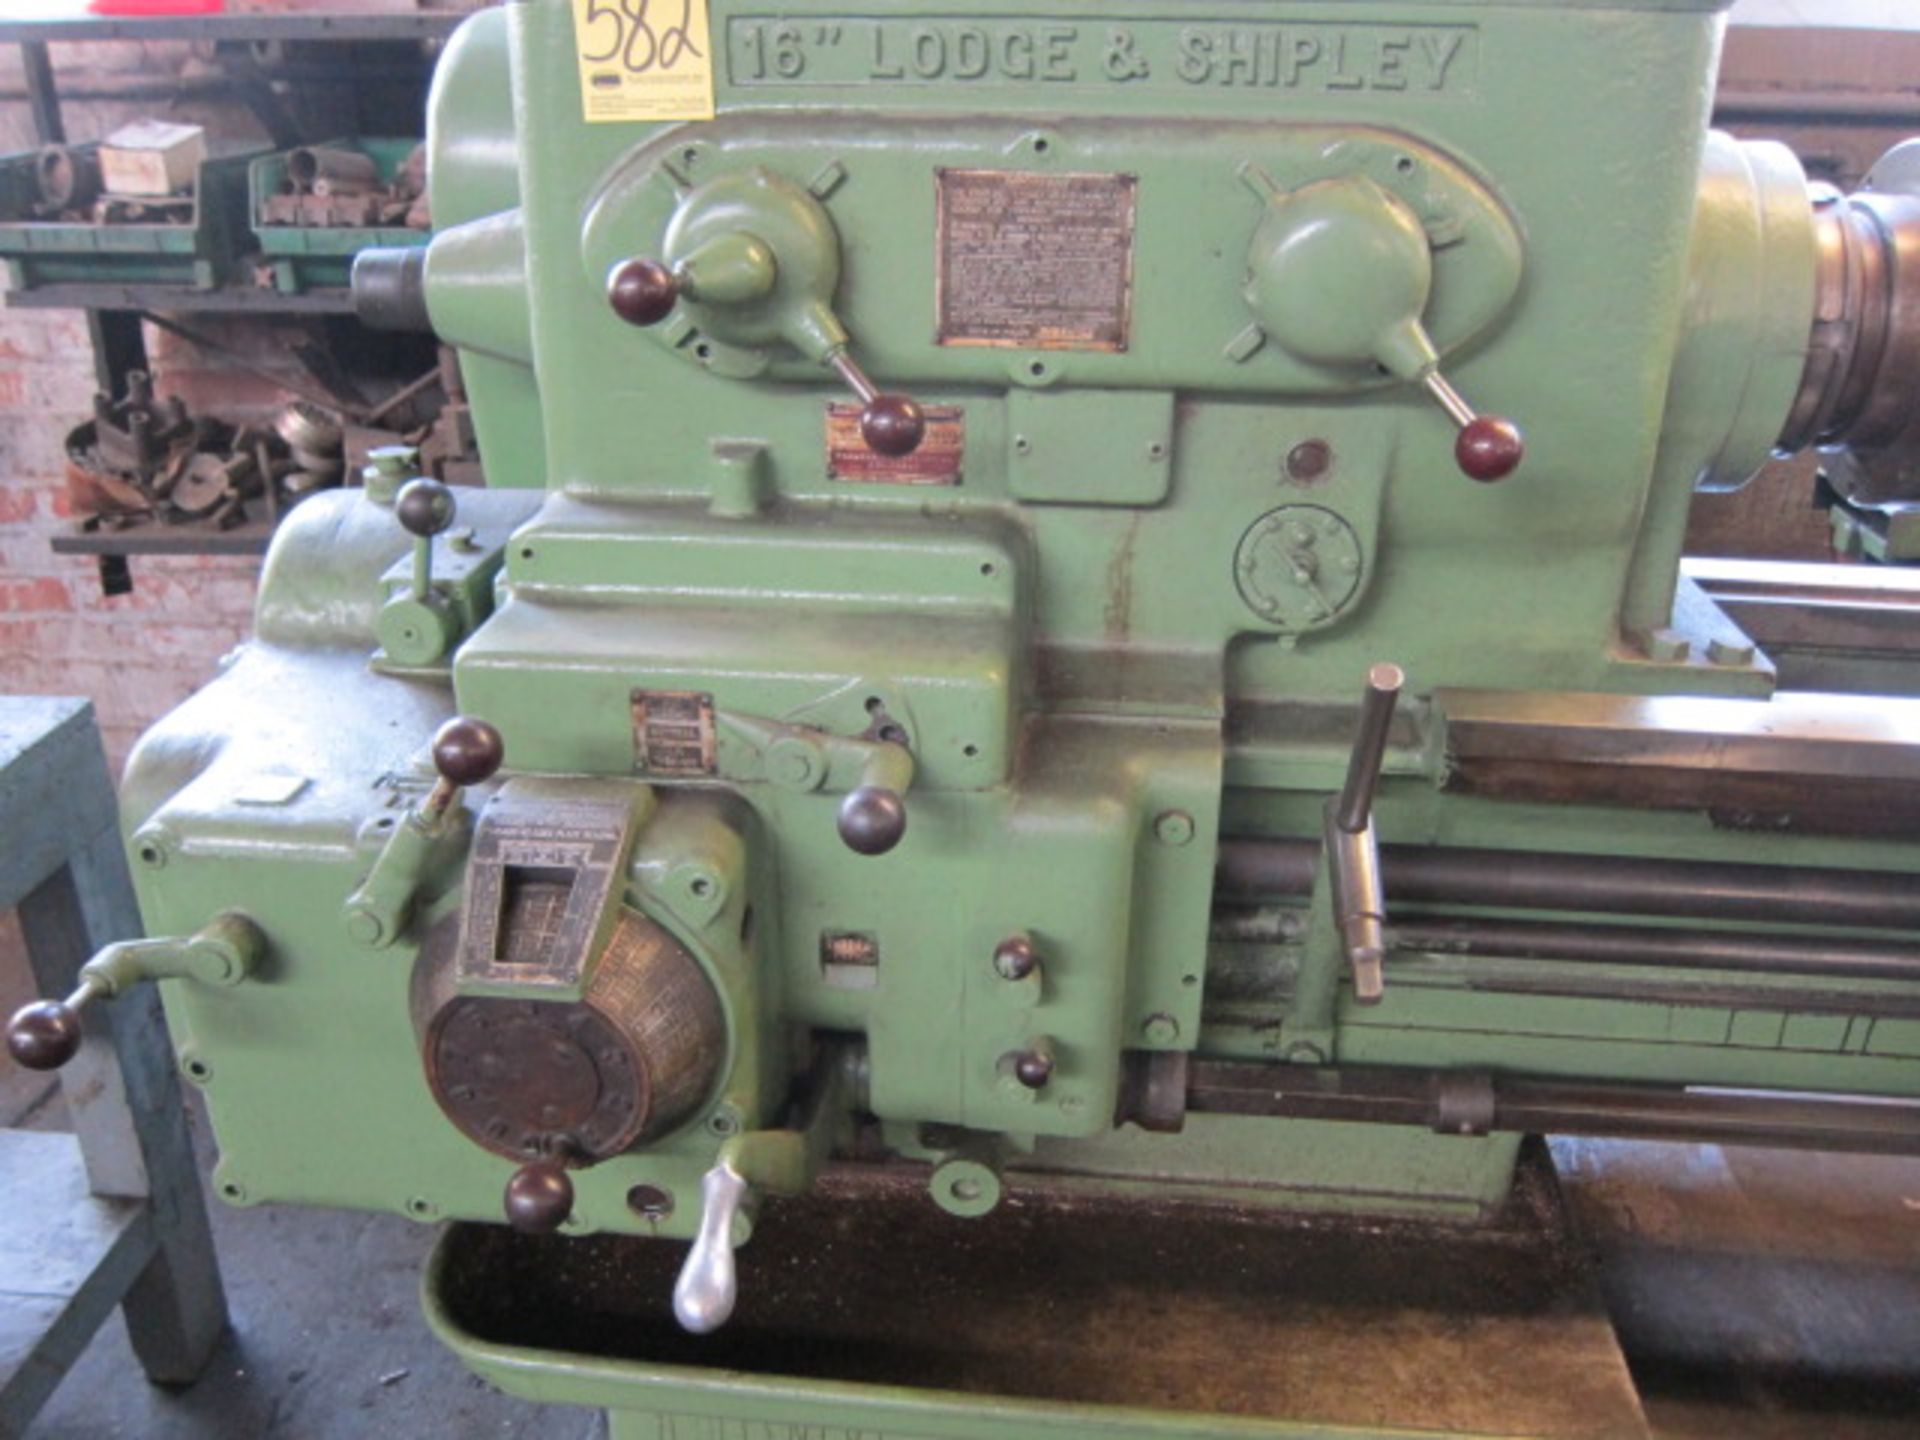 ENGINE LATHE, LODGE & SHIPLEY 16" X 84" MDL. X, 18" actual sw. over bed, taper attach., - Image 3 of 6